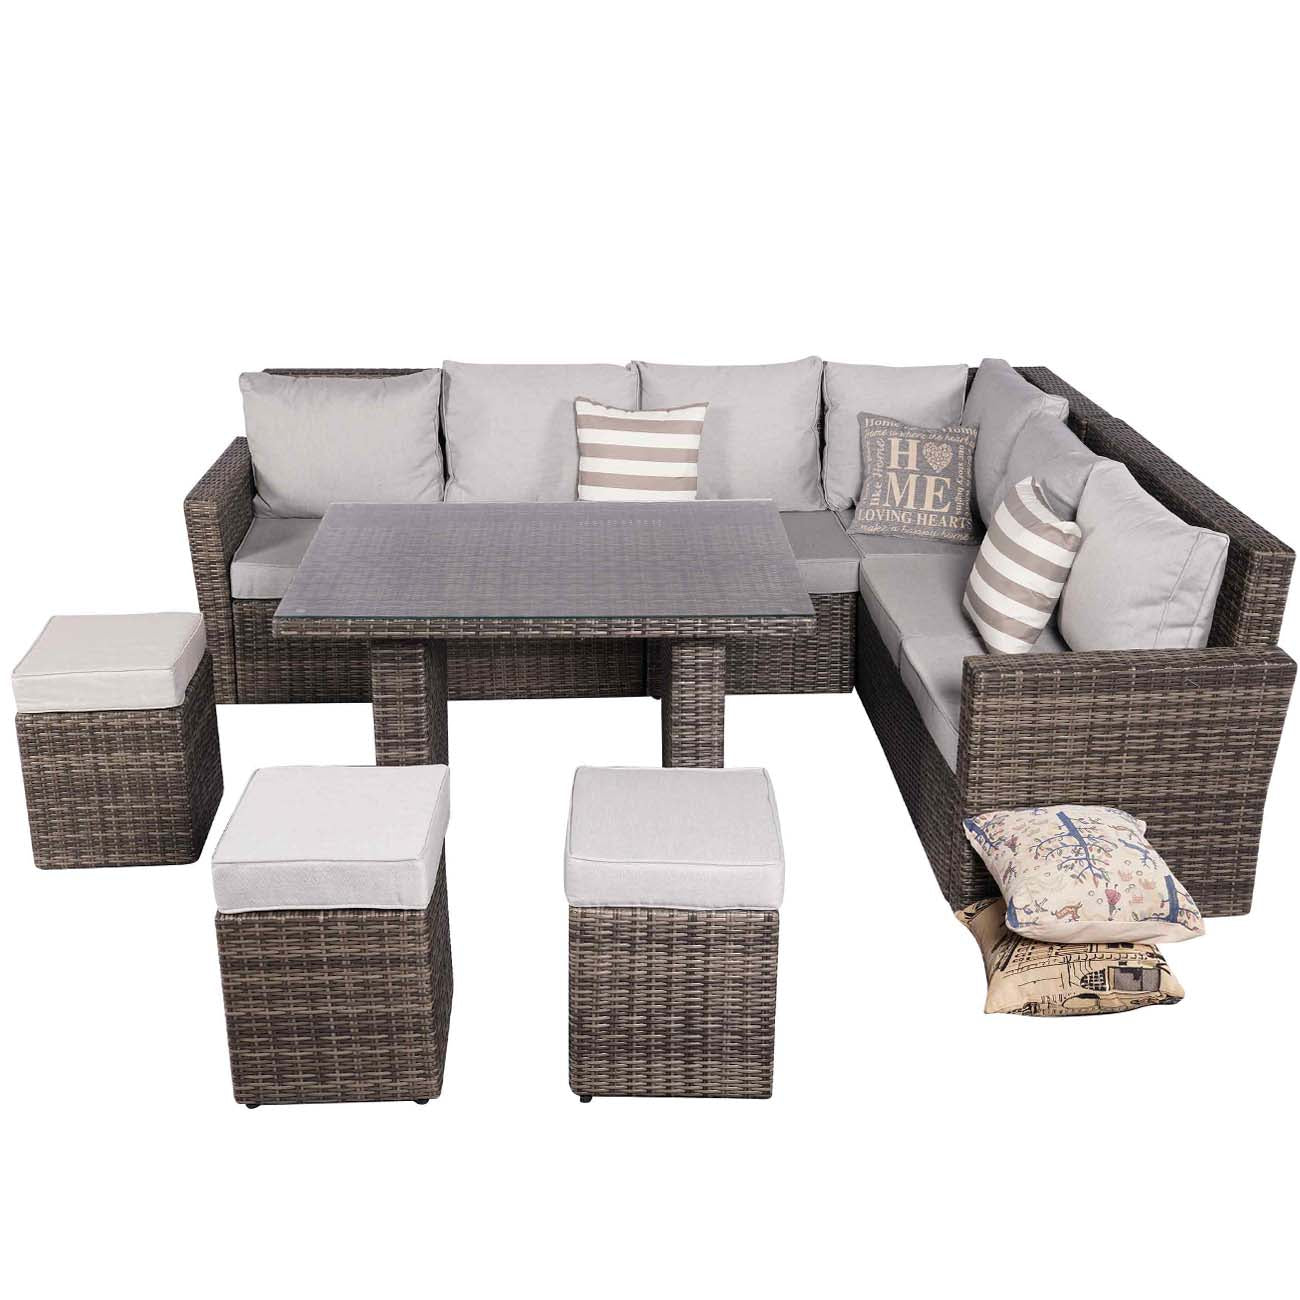 Abrihome Deluxe 8 Piece Deep Seating Group with Cushion